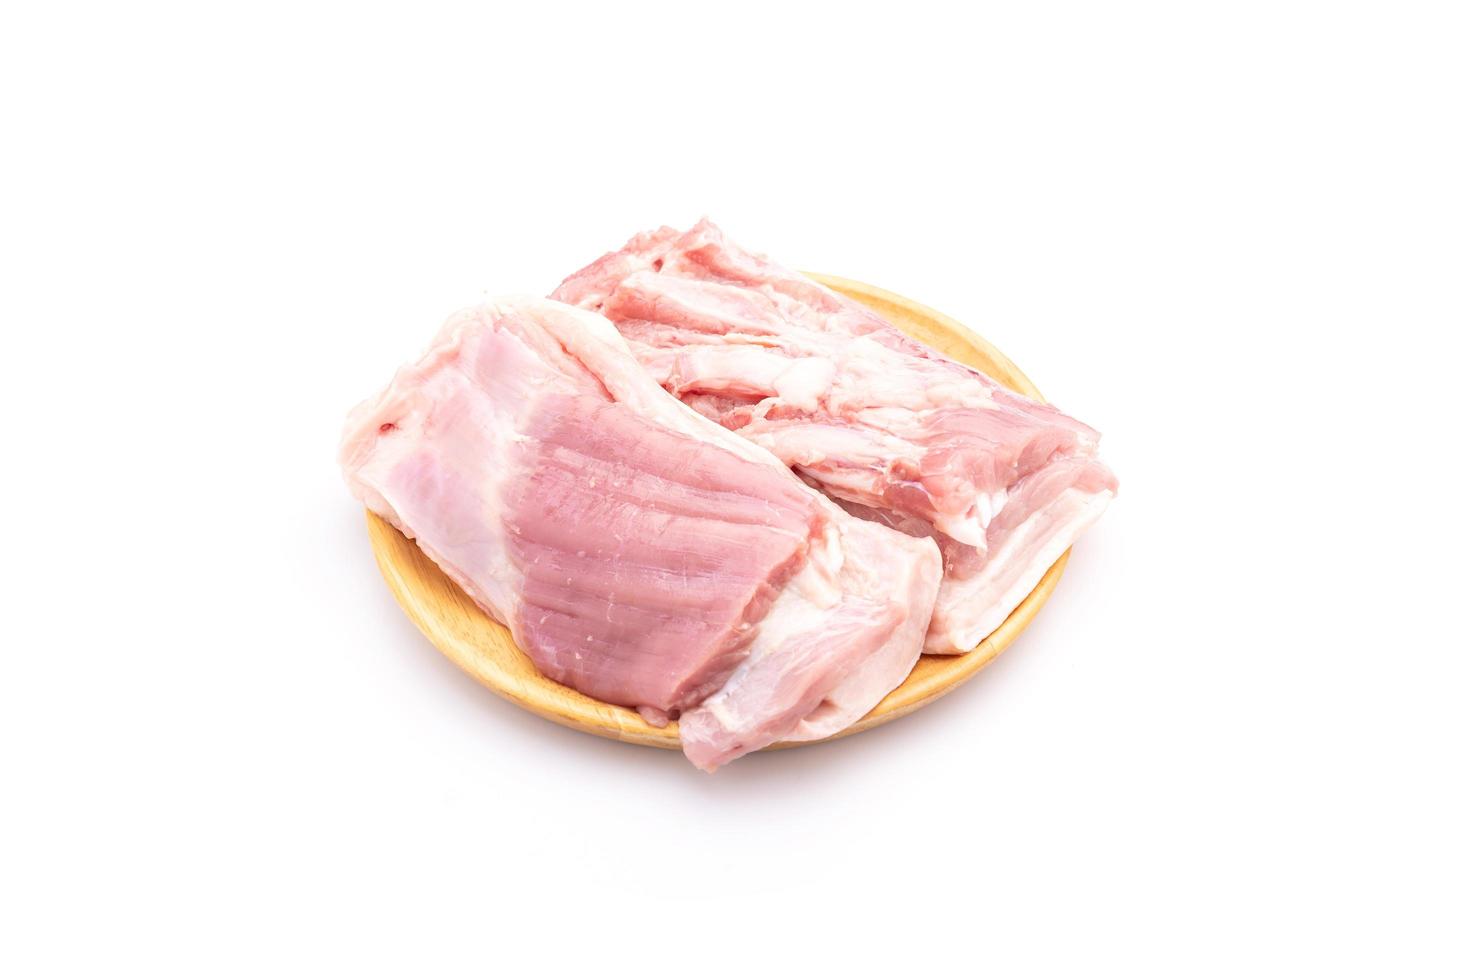 Raw streaky pork on wooden dish isolated on white background. Food and healthcare concept photo